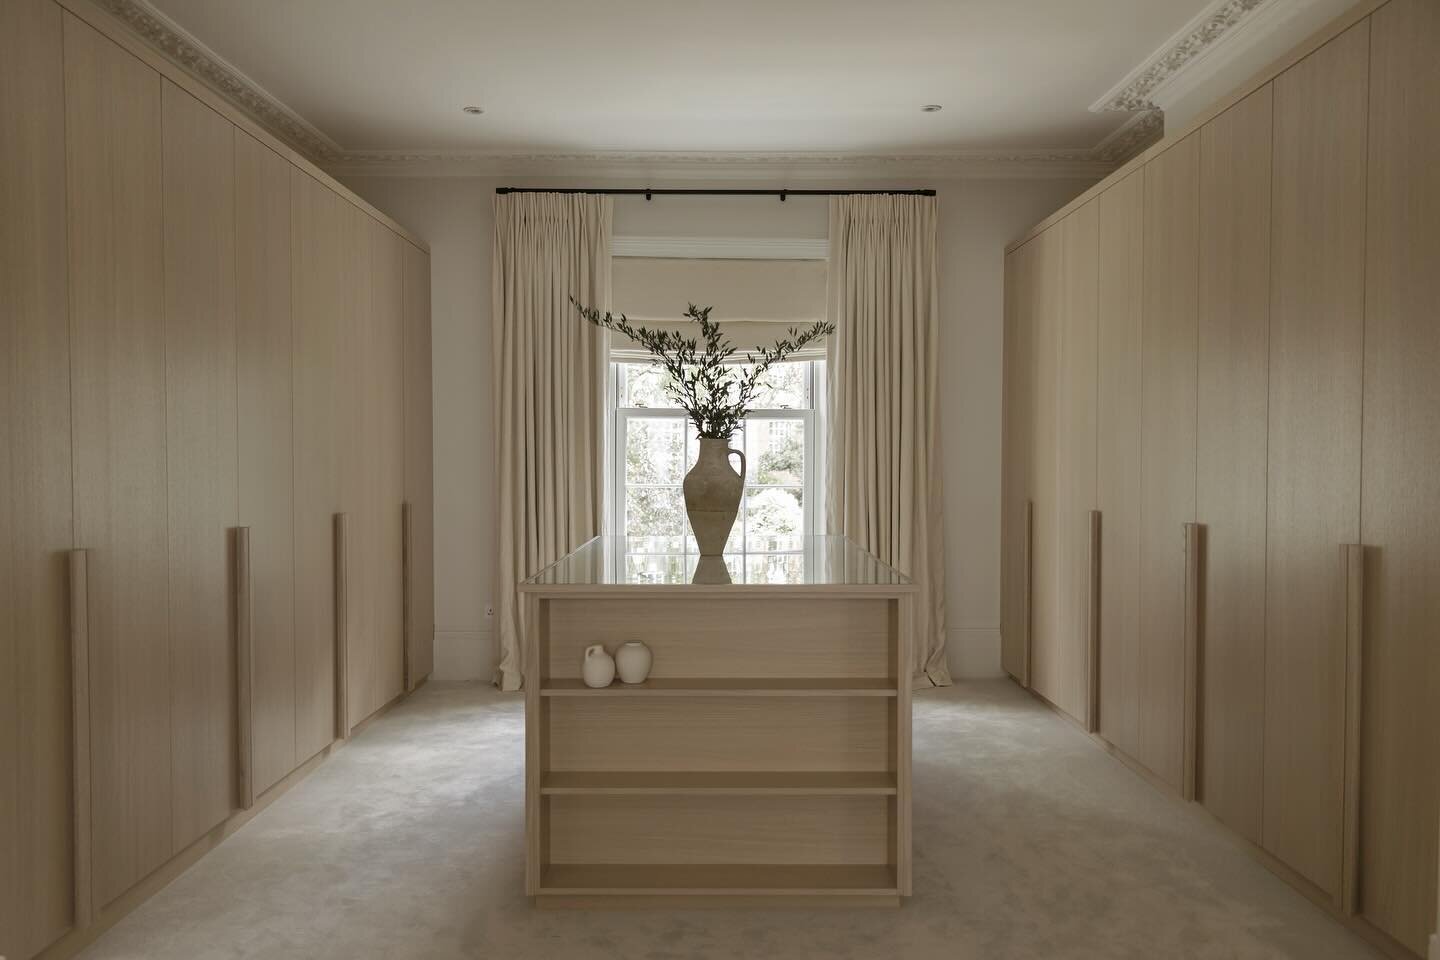 Is there anything better than a fully organised wardrobe in January? Well, what about a fully reconfigured and redesigned dressing room?! 

We designed custom built in wardrobes and a large central island, in beautiful light, calming tones to ensure 